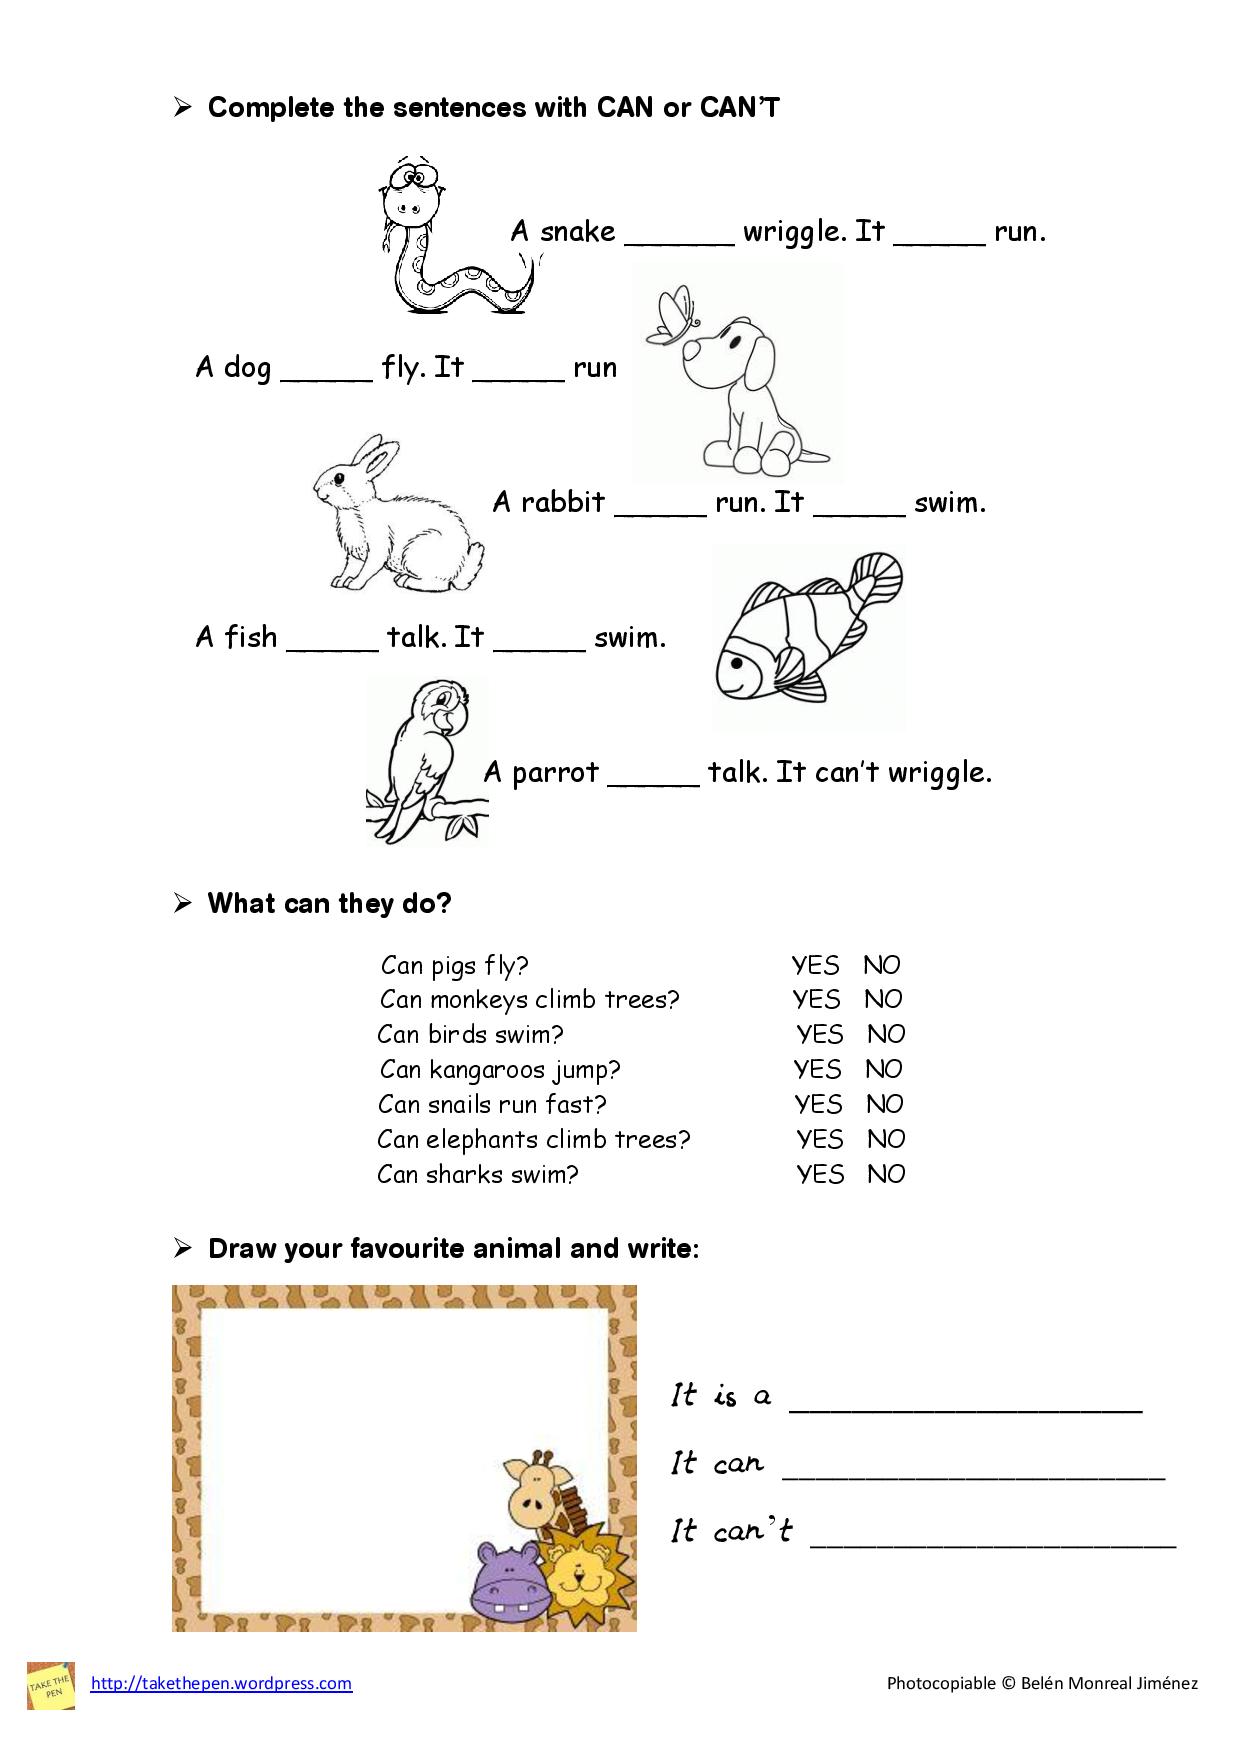 can or can't worksheet